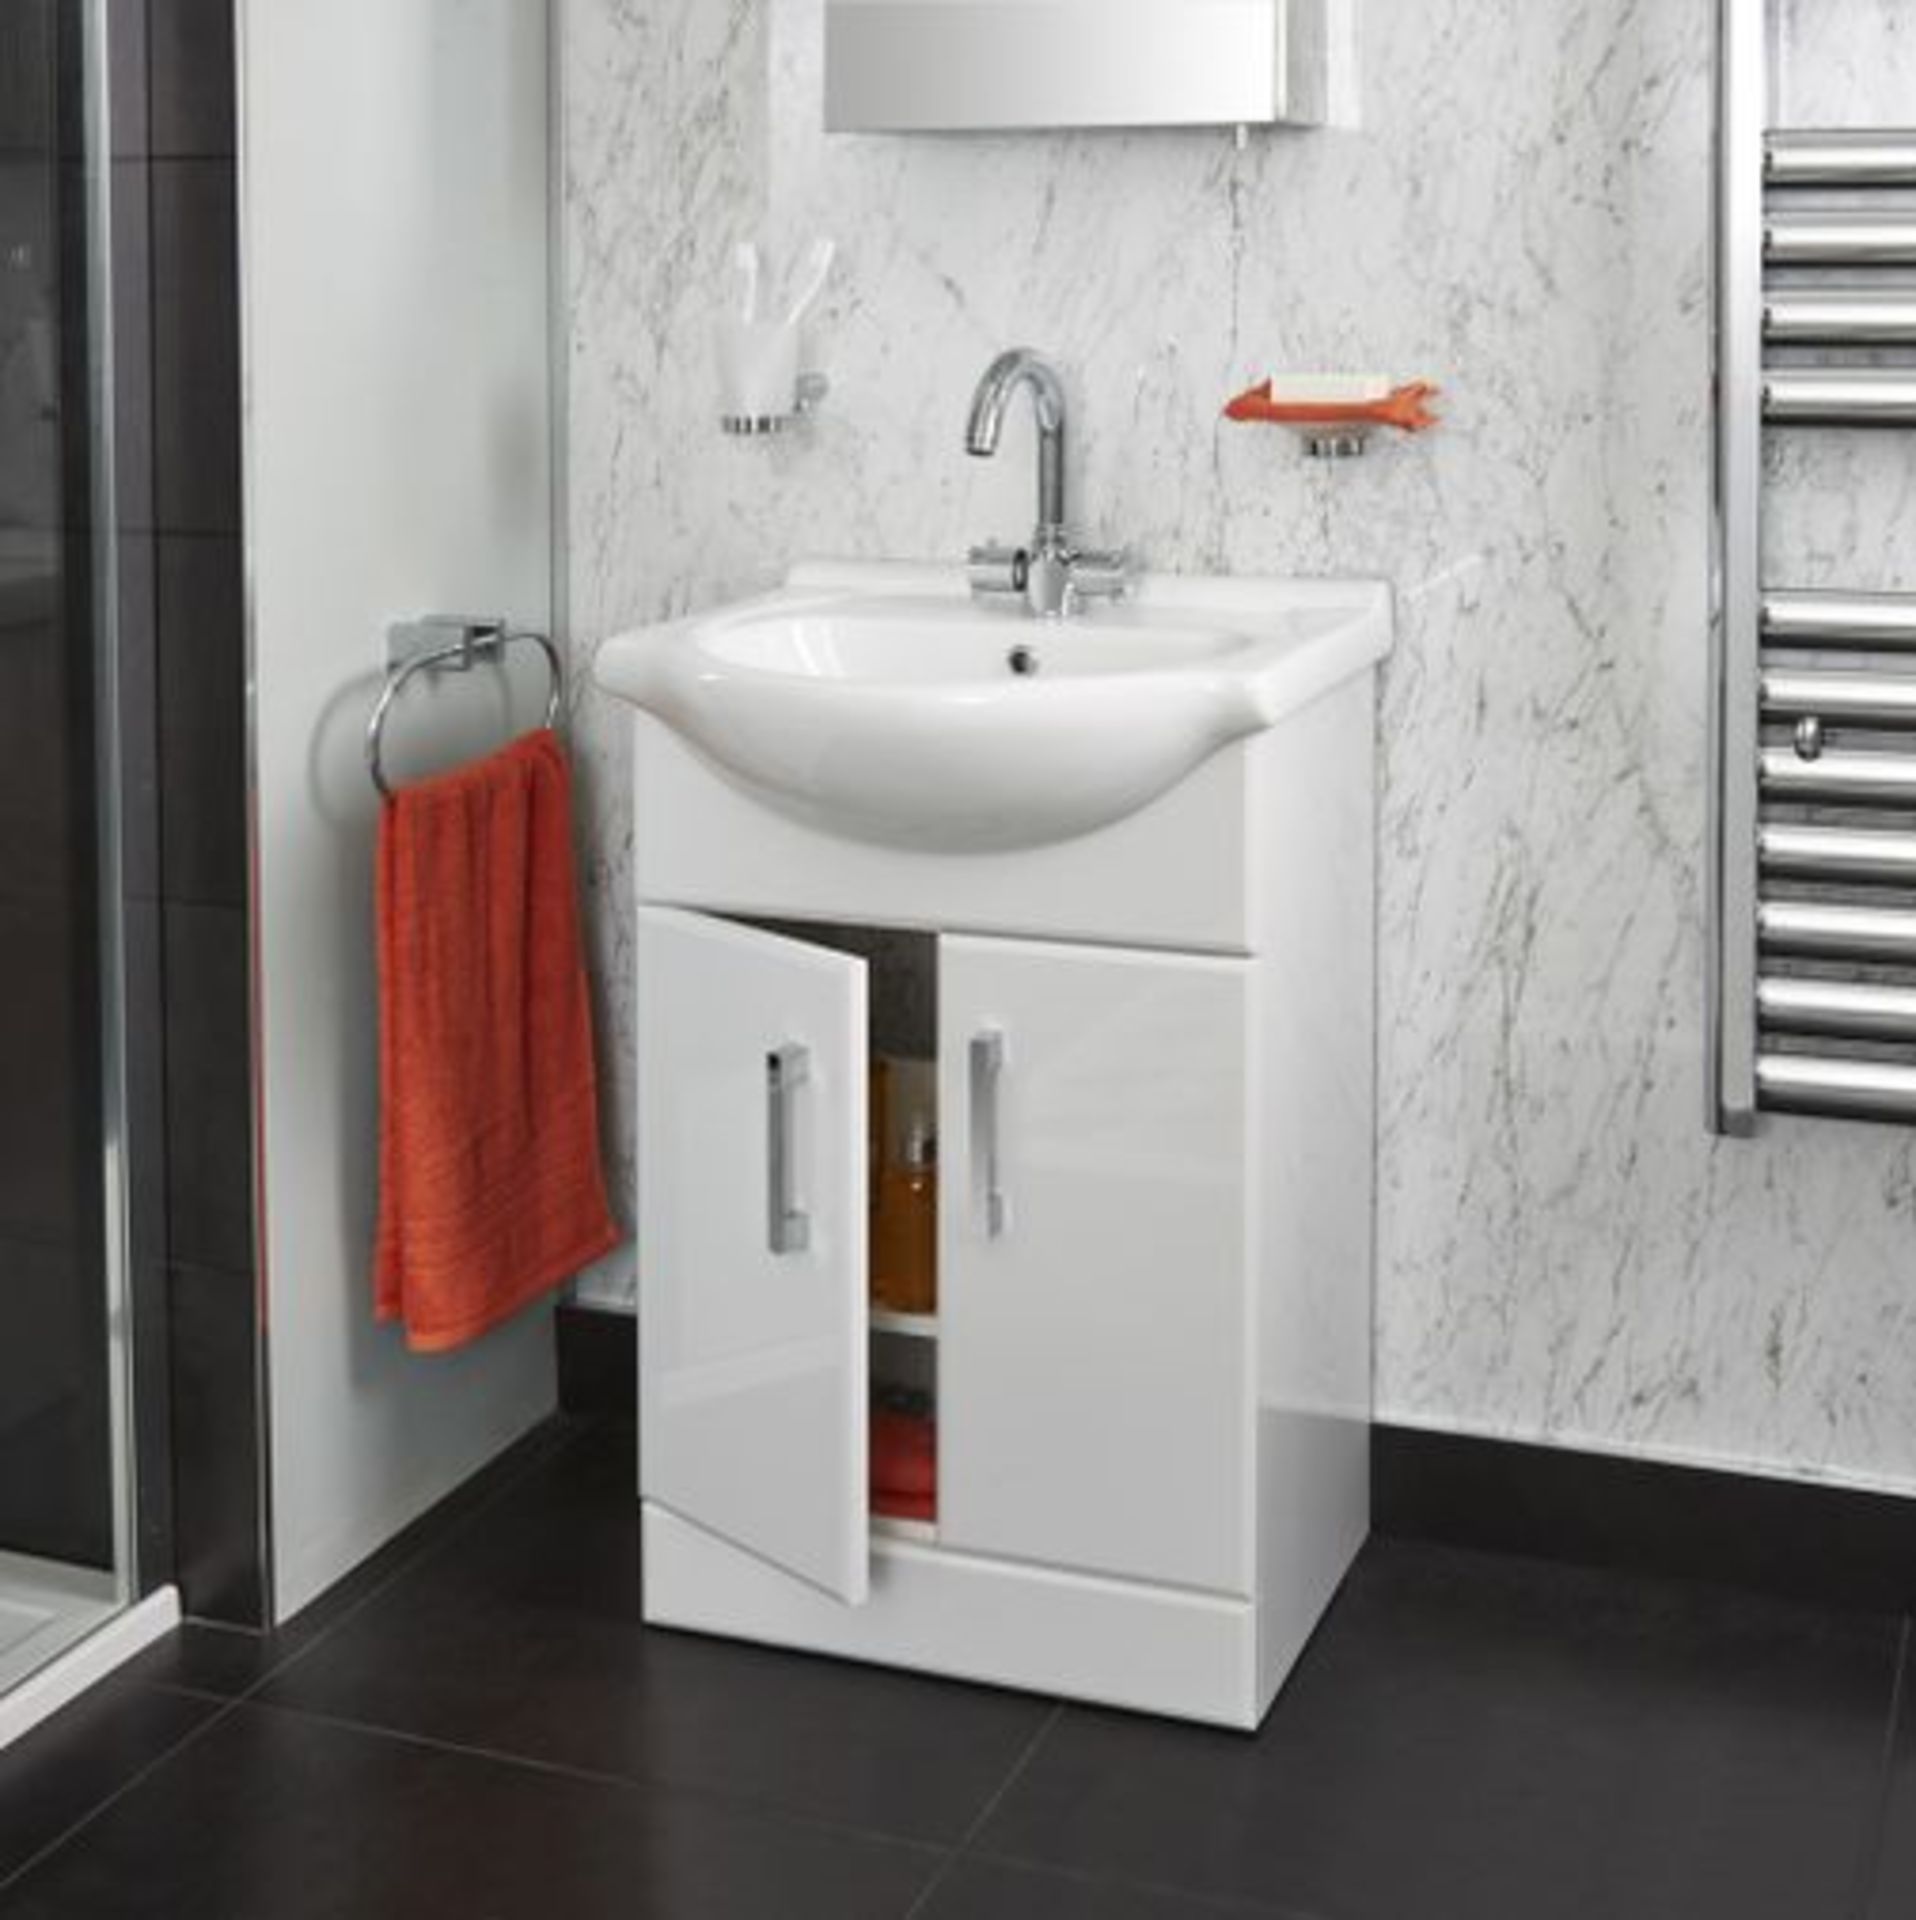 New (A71) Lanza 550mm Vanity Unit. RRP £403.99. Comes Complete With Basin. New (A71) Lanza   New ( - Image 3 of 3